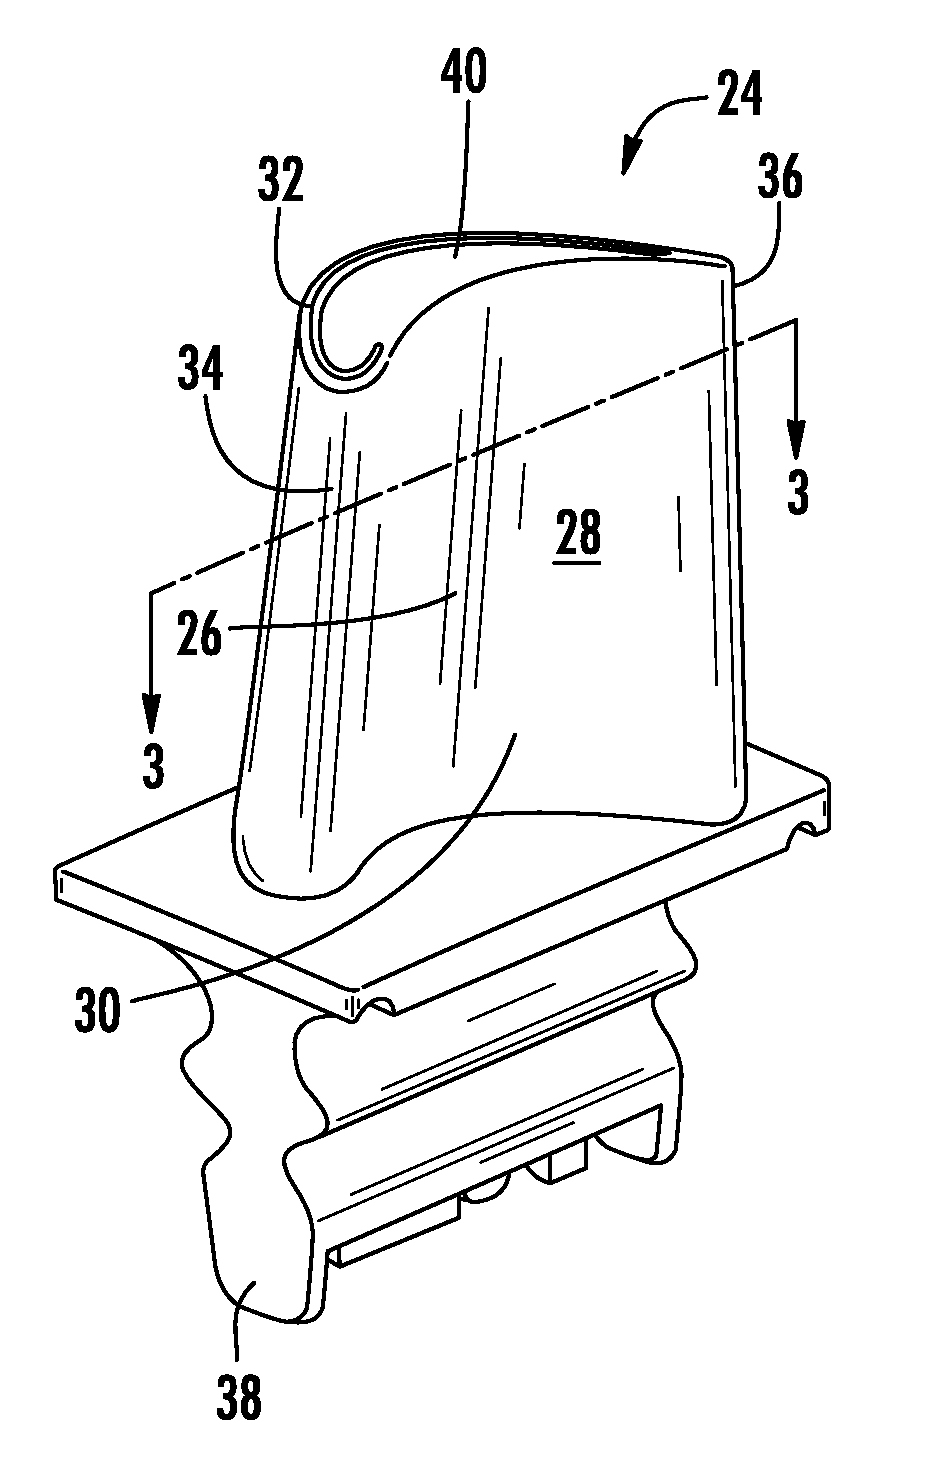 Cooling system having reduced mass pin fins for components in a gas turbine engine